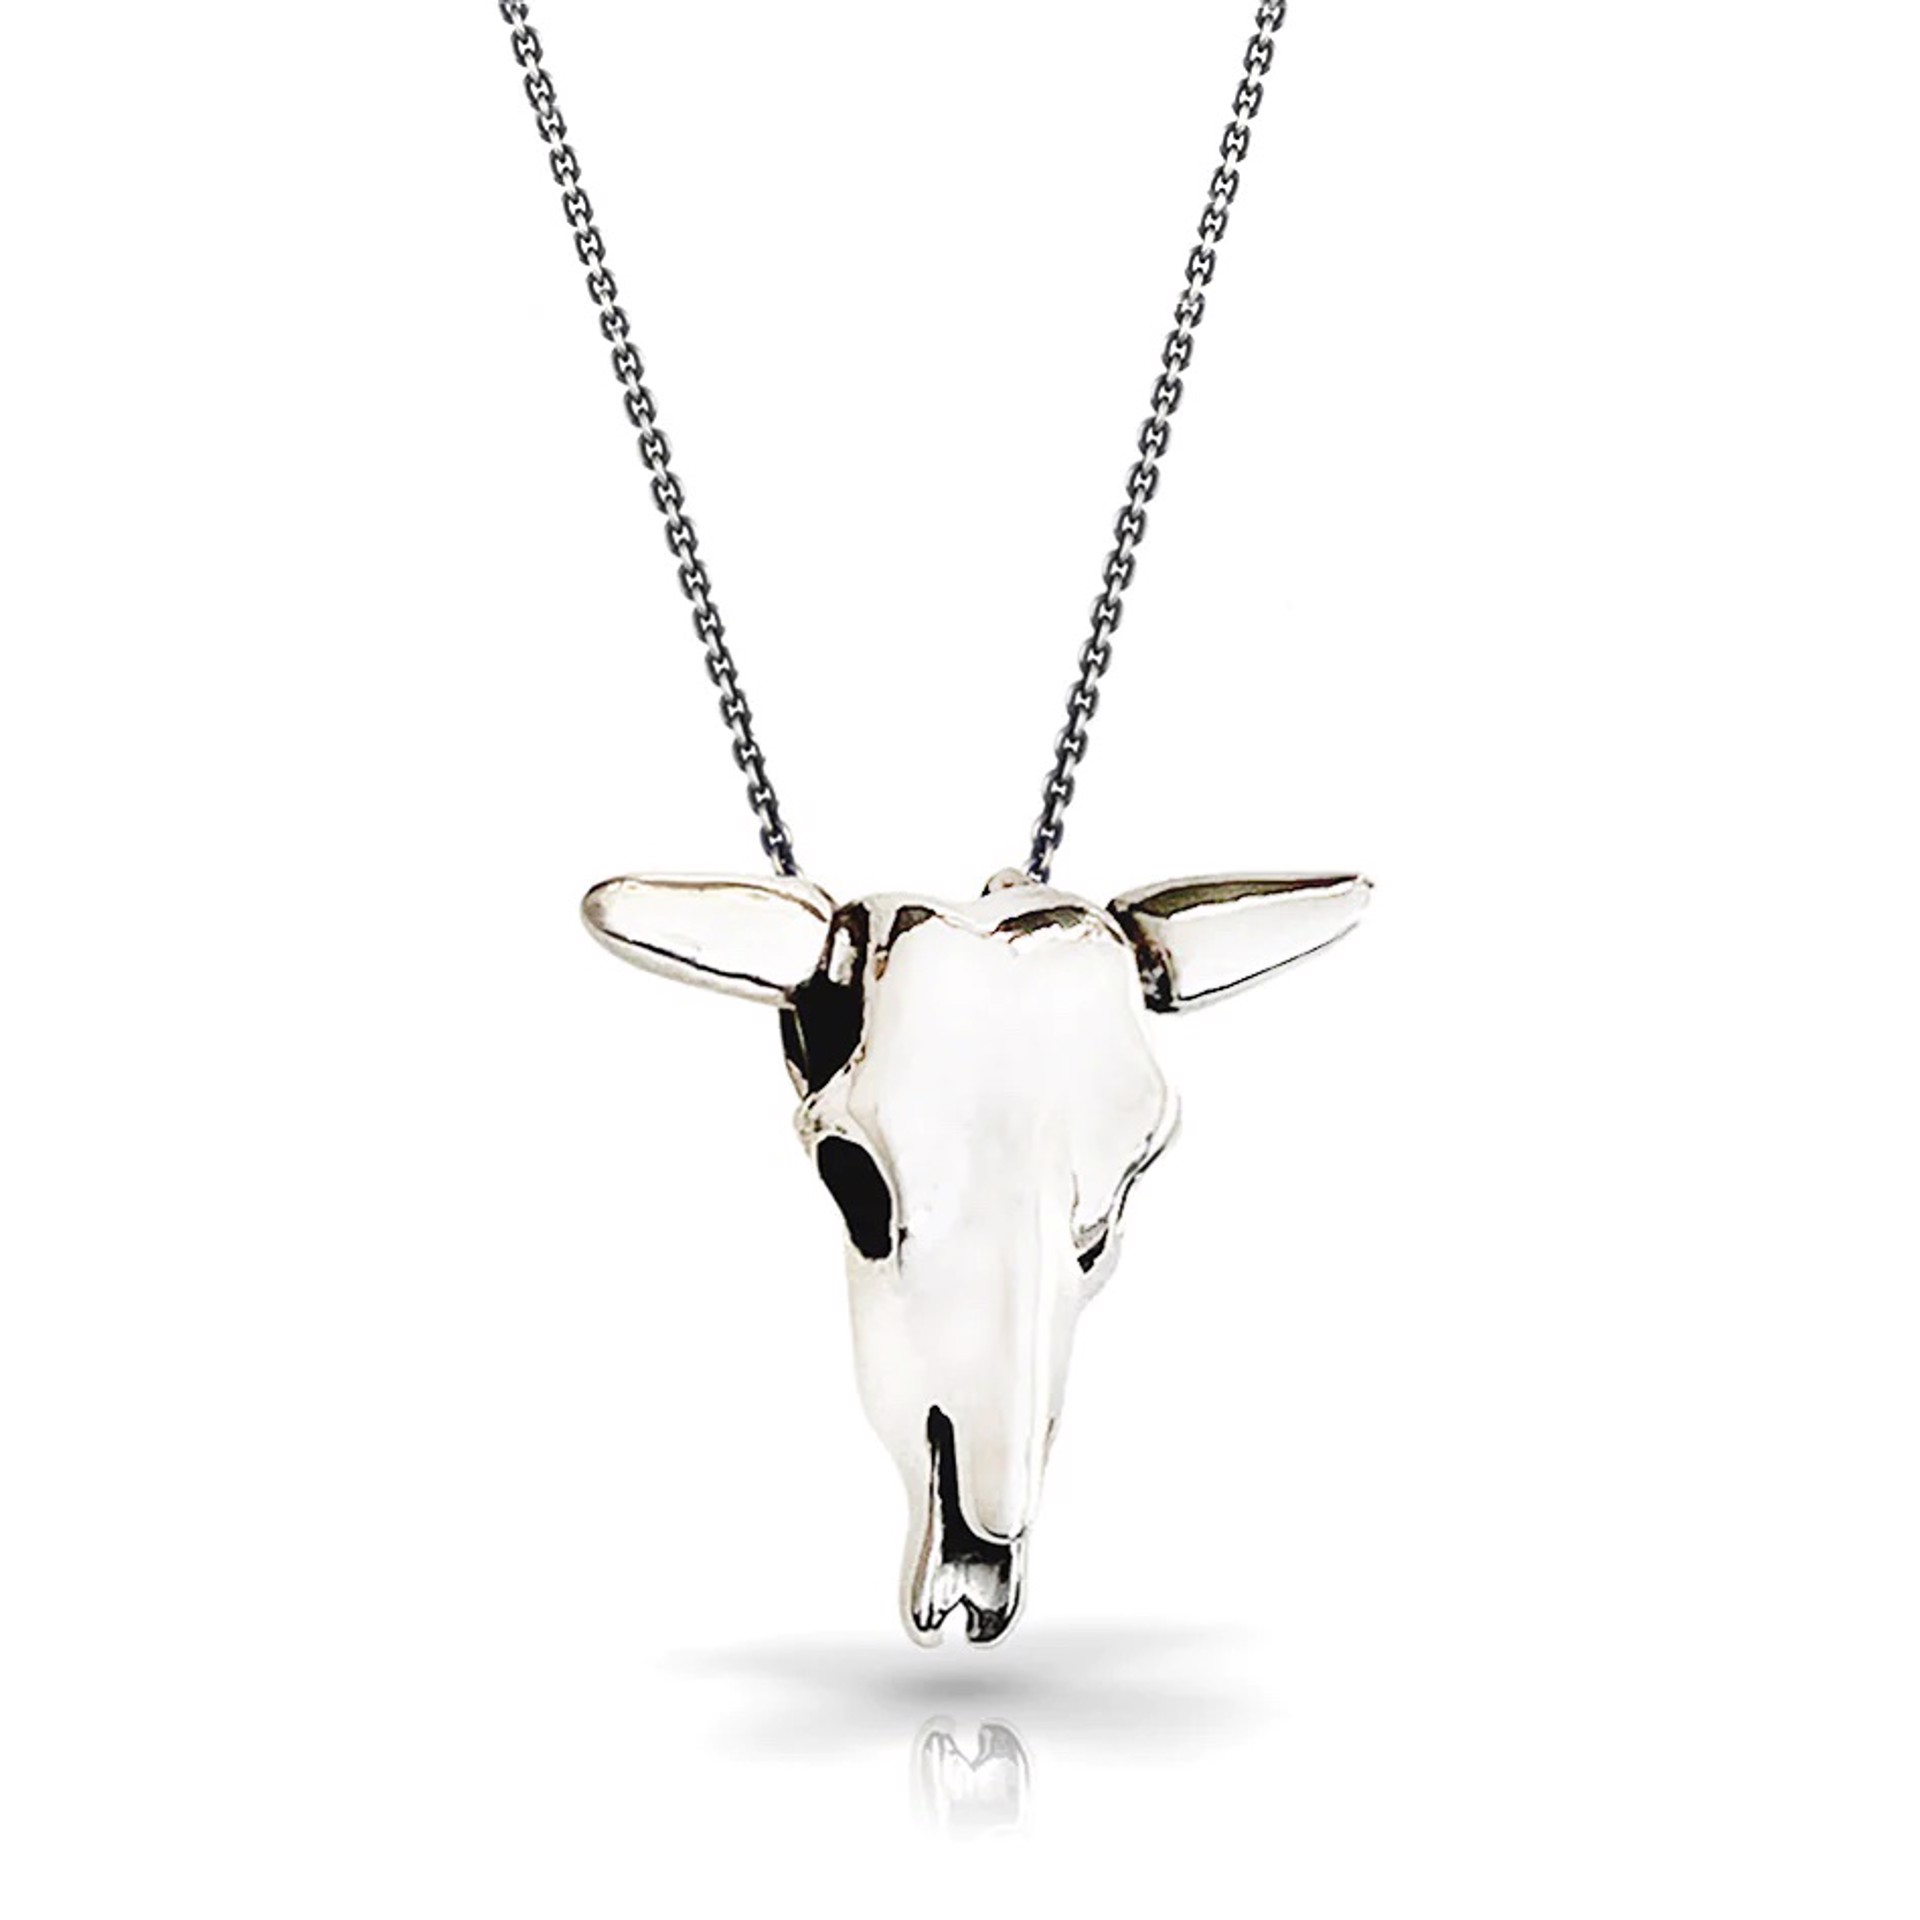 Petite "Frida" Silver Cow Skull Necklace - High Polish Silver by Louisa Berky